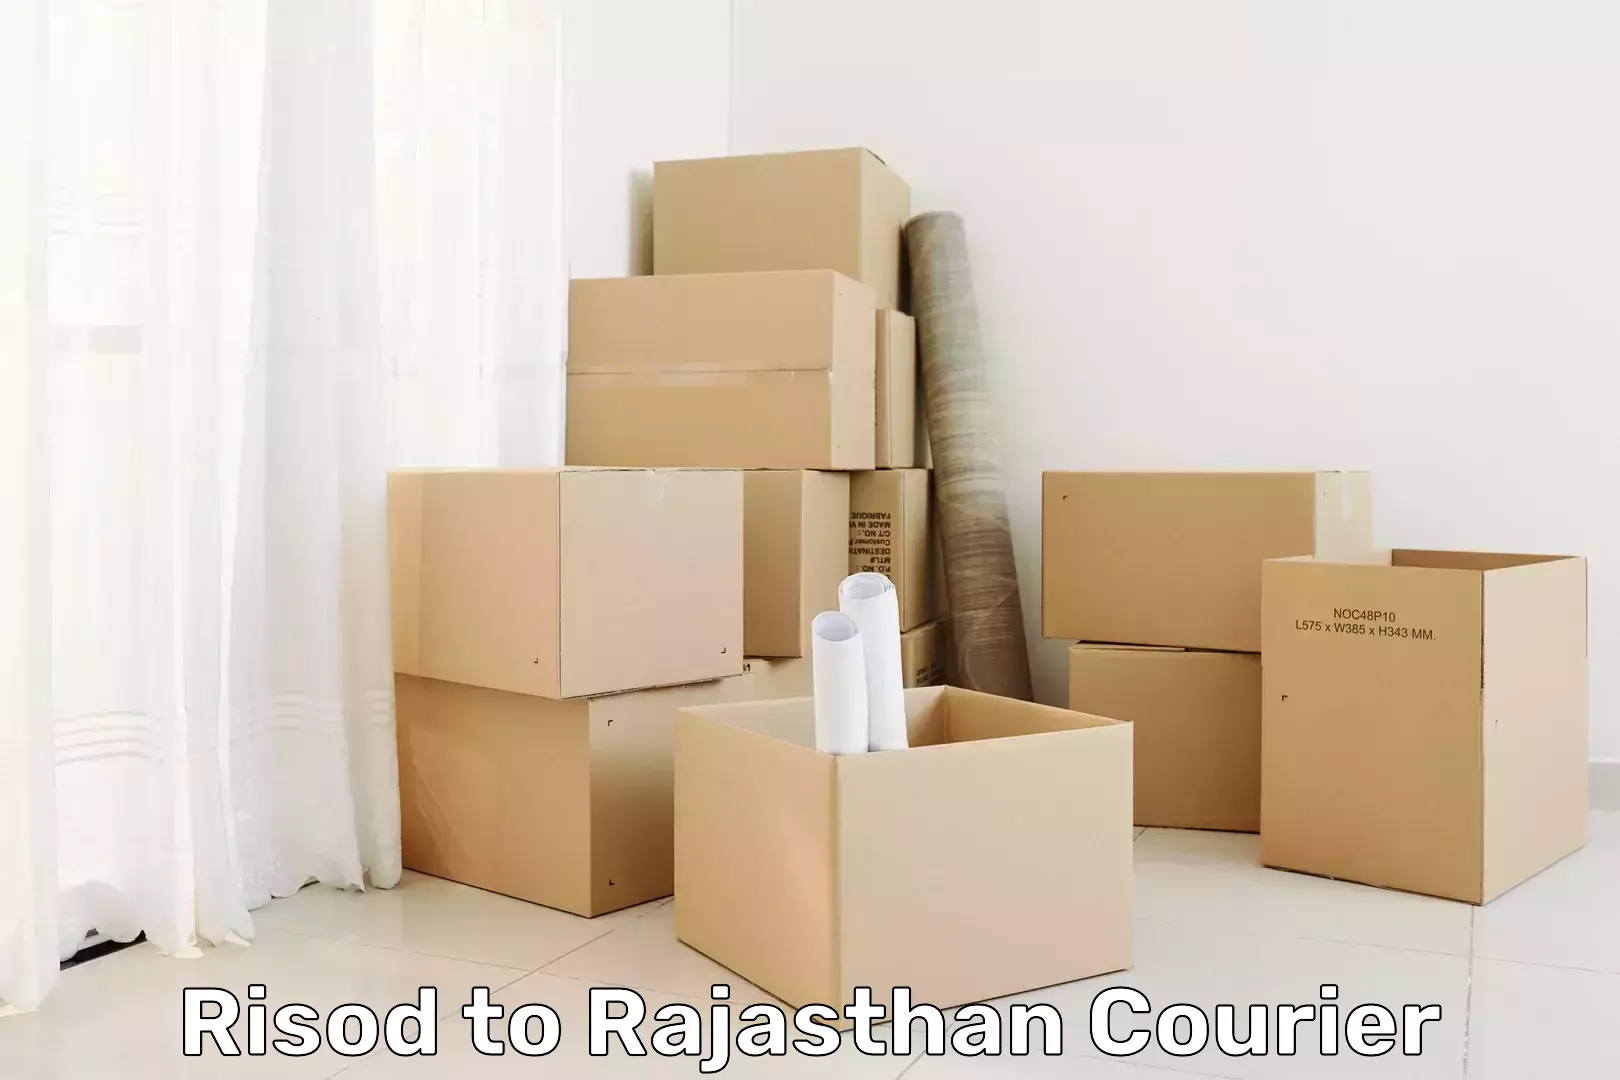 Speedy delivery service Risod to Rajasthan